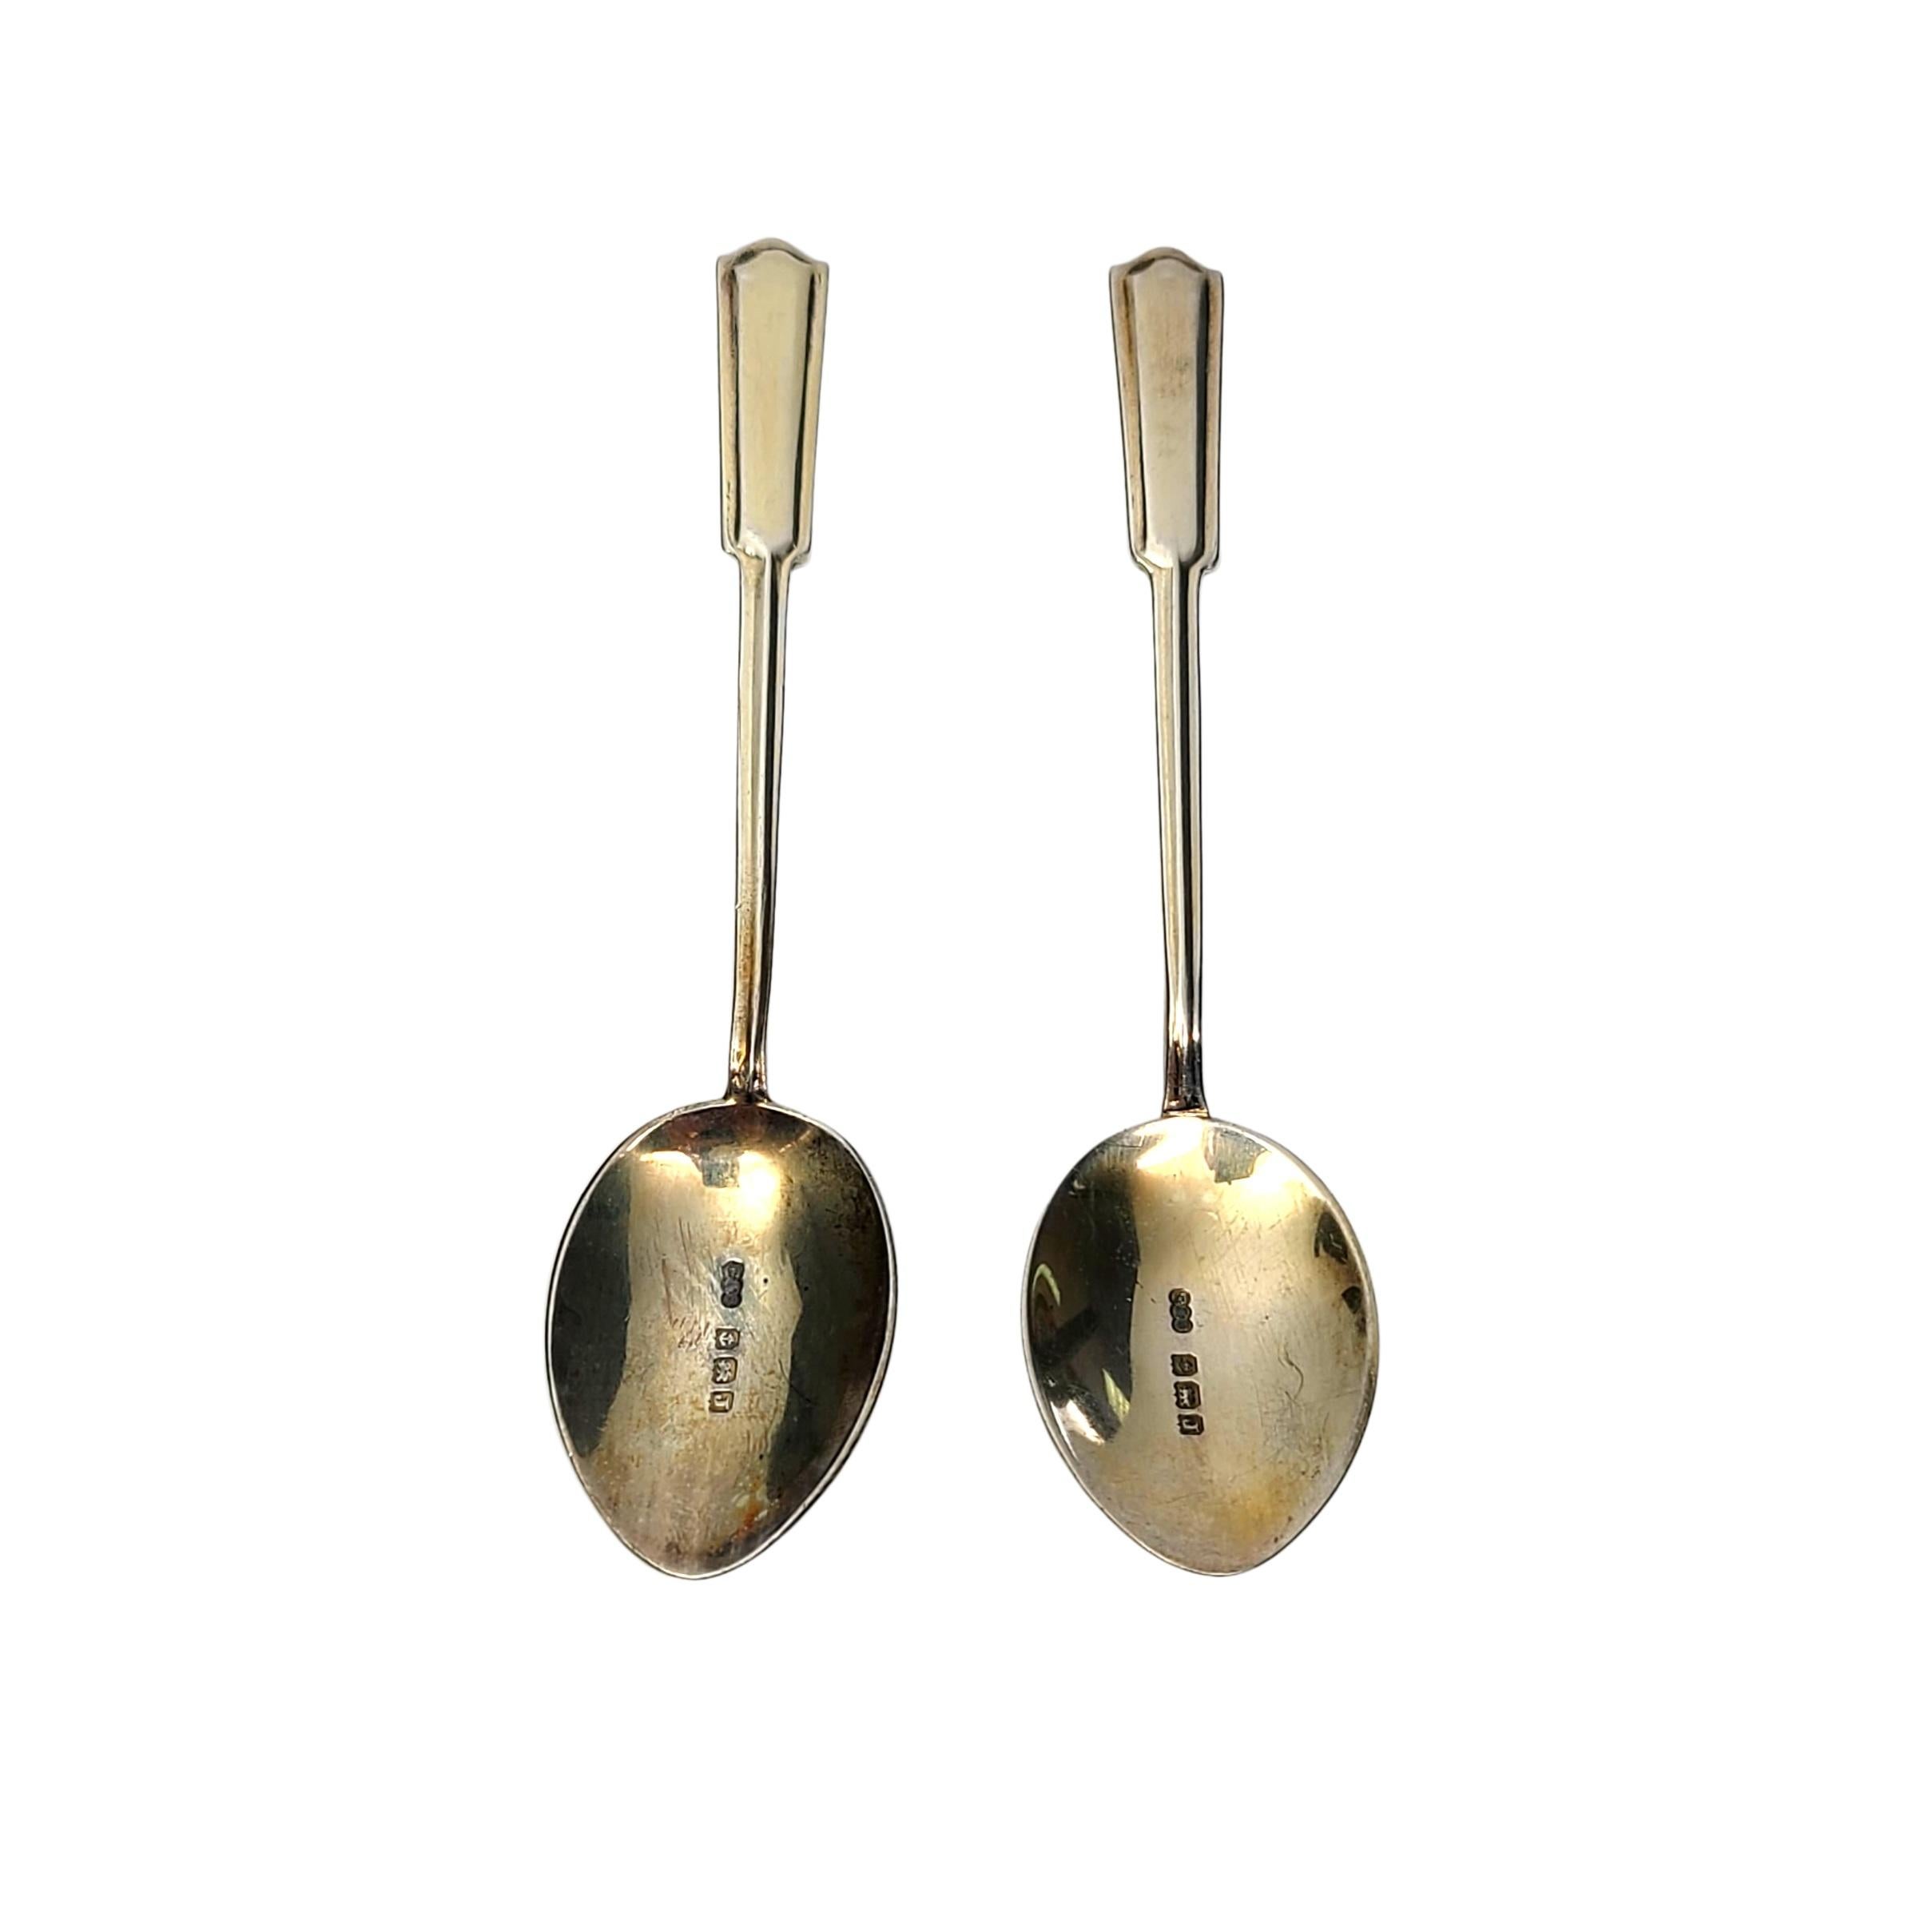 Set of 2 sterling silver and enamel demitasse spoons by Turner & Simpson of Birmingham, England, circa 1933.

No monogram

Beautifully enameled blue, black and white design on the back of the bowls and handle. Spoons have a gold wash over sterling